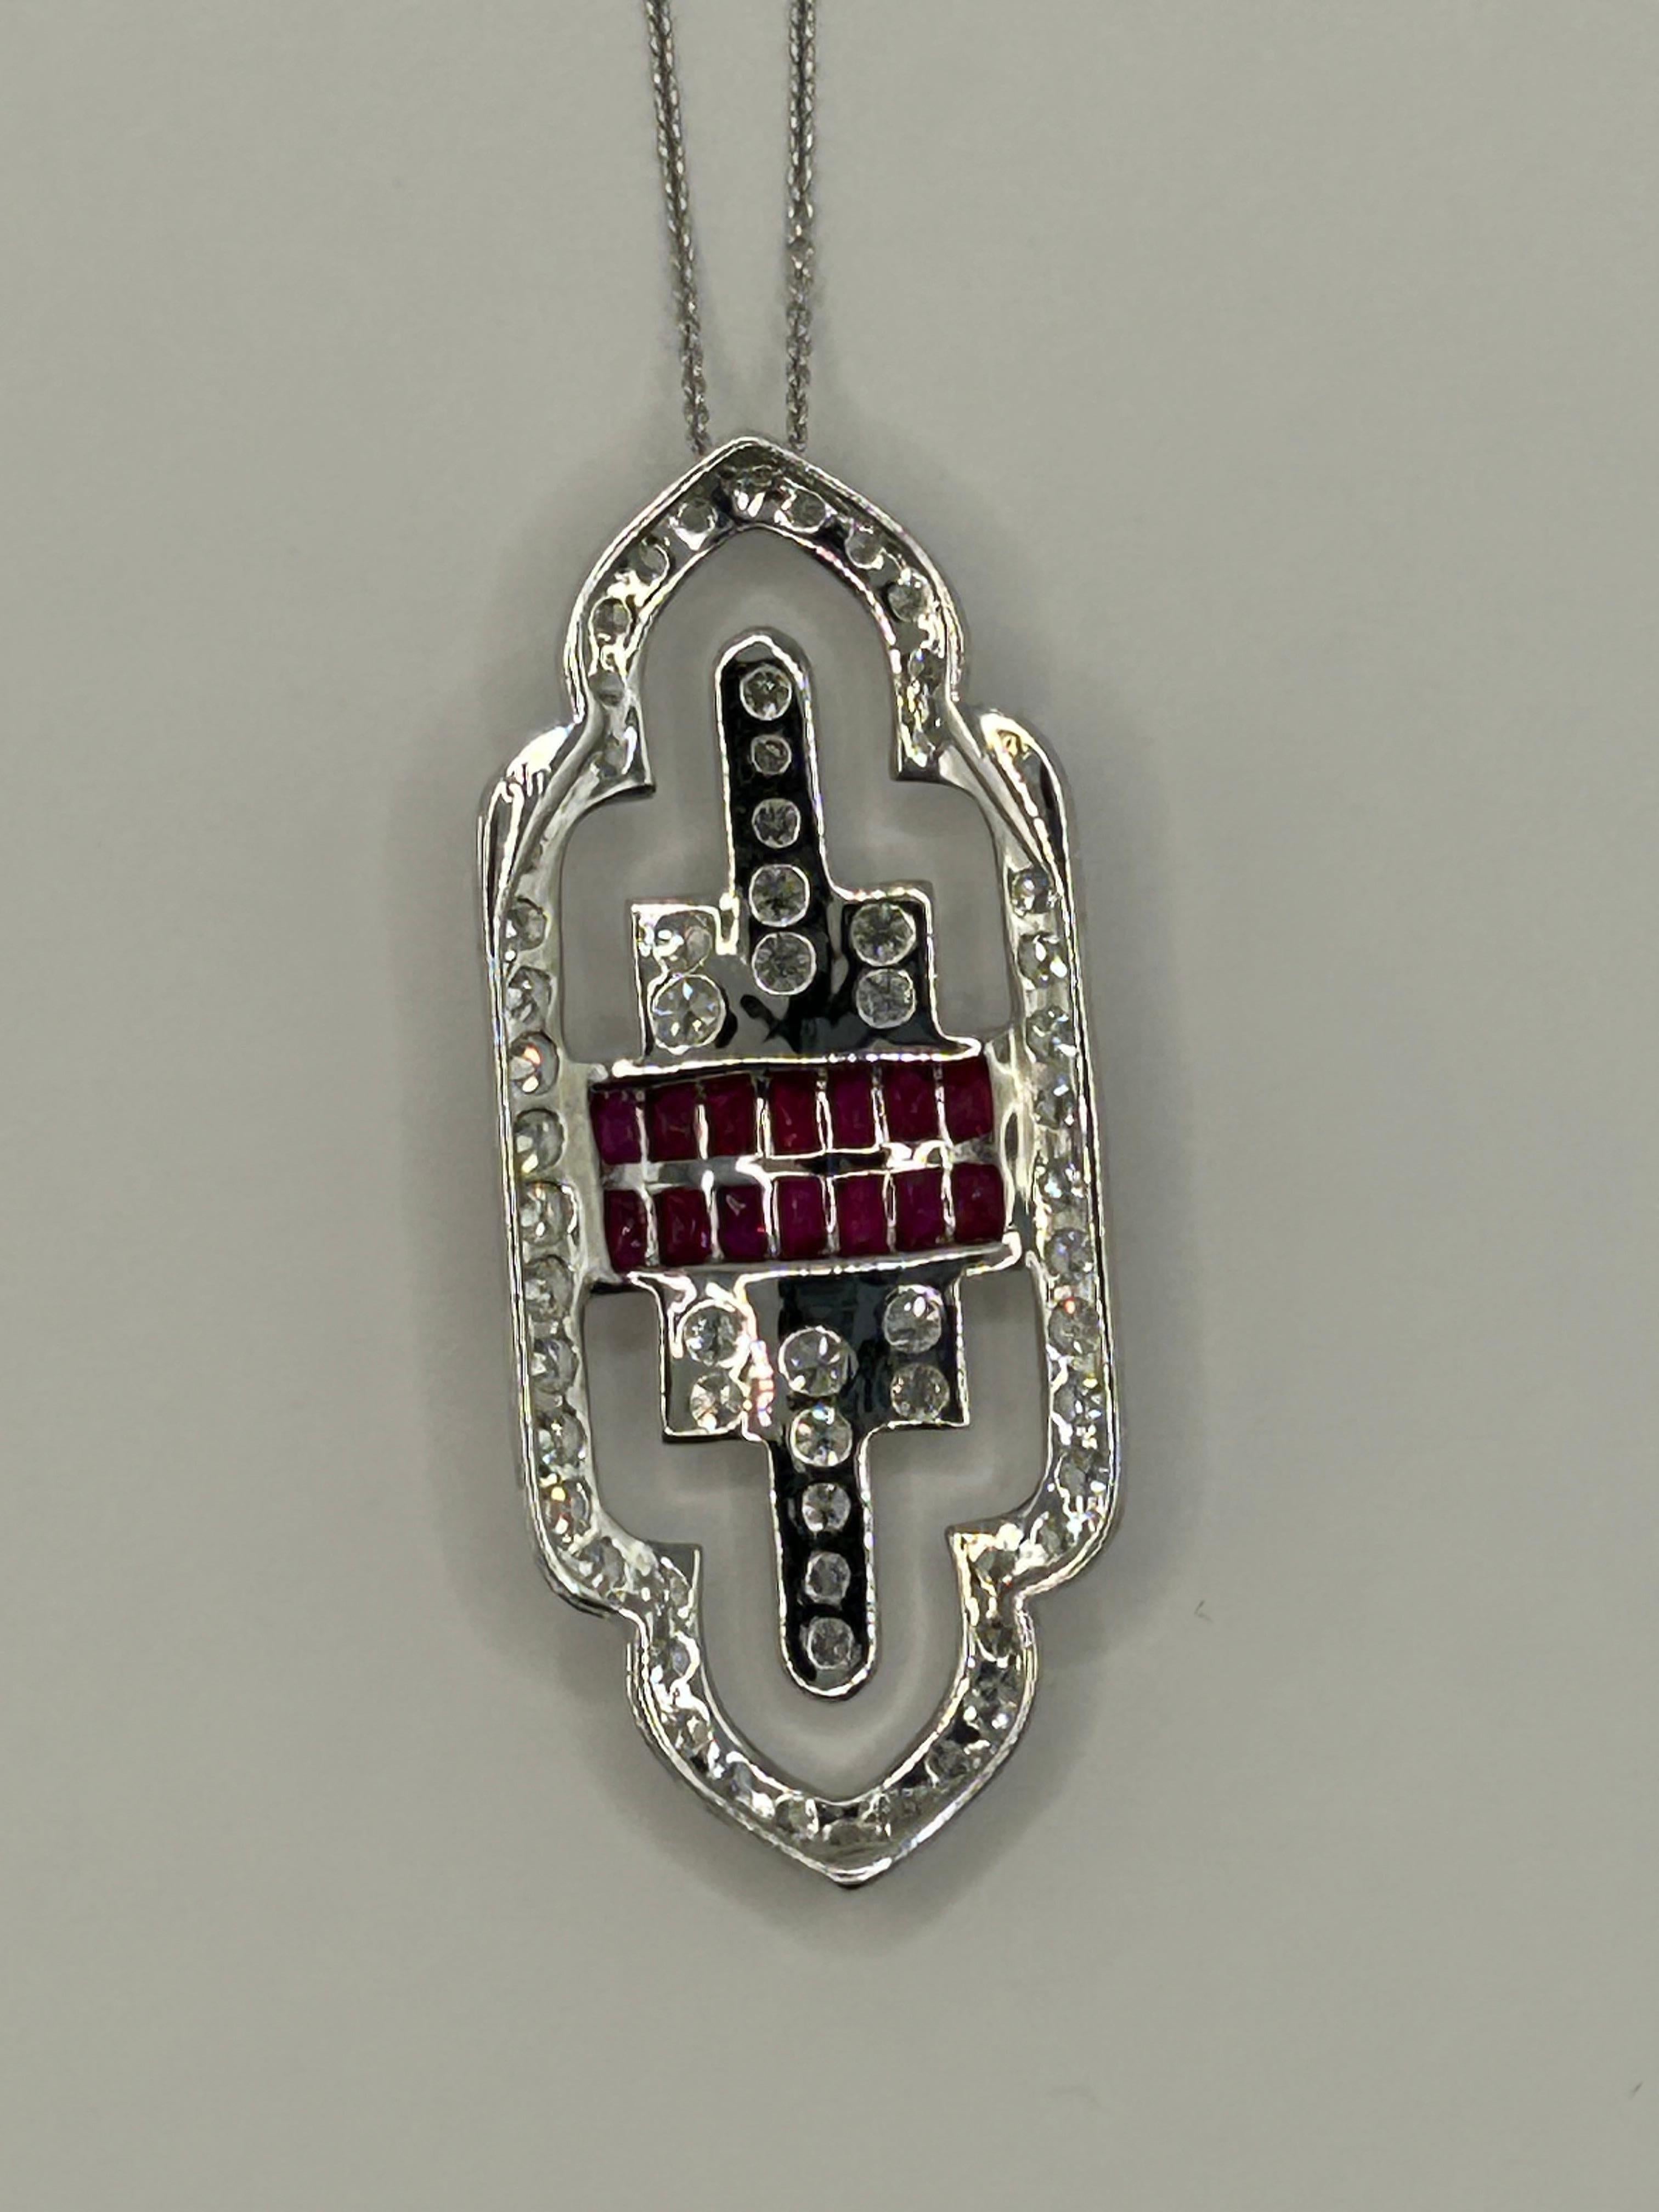 Vintage inspired Art Deco style 18 Karat White Gold Pendant set with 2.05 Carat Fine Quality French Cut Ruby and Round Brilliant Cut Diamonds of 2.48 Carat Total Weight.  Average Diamond Clarity is VS and Color is G.
Pendant is strung with 18 Karat